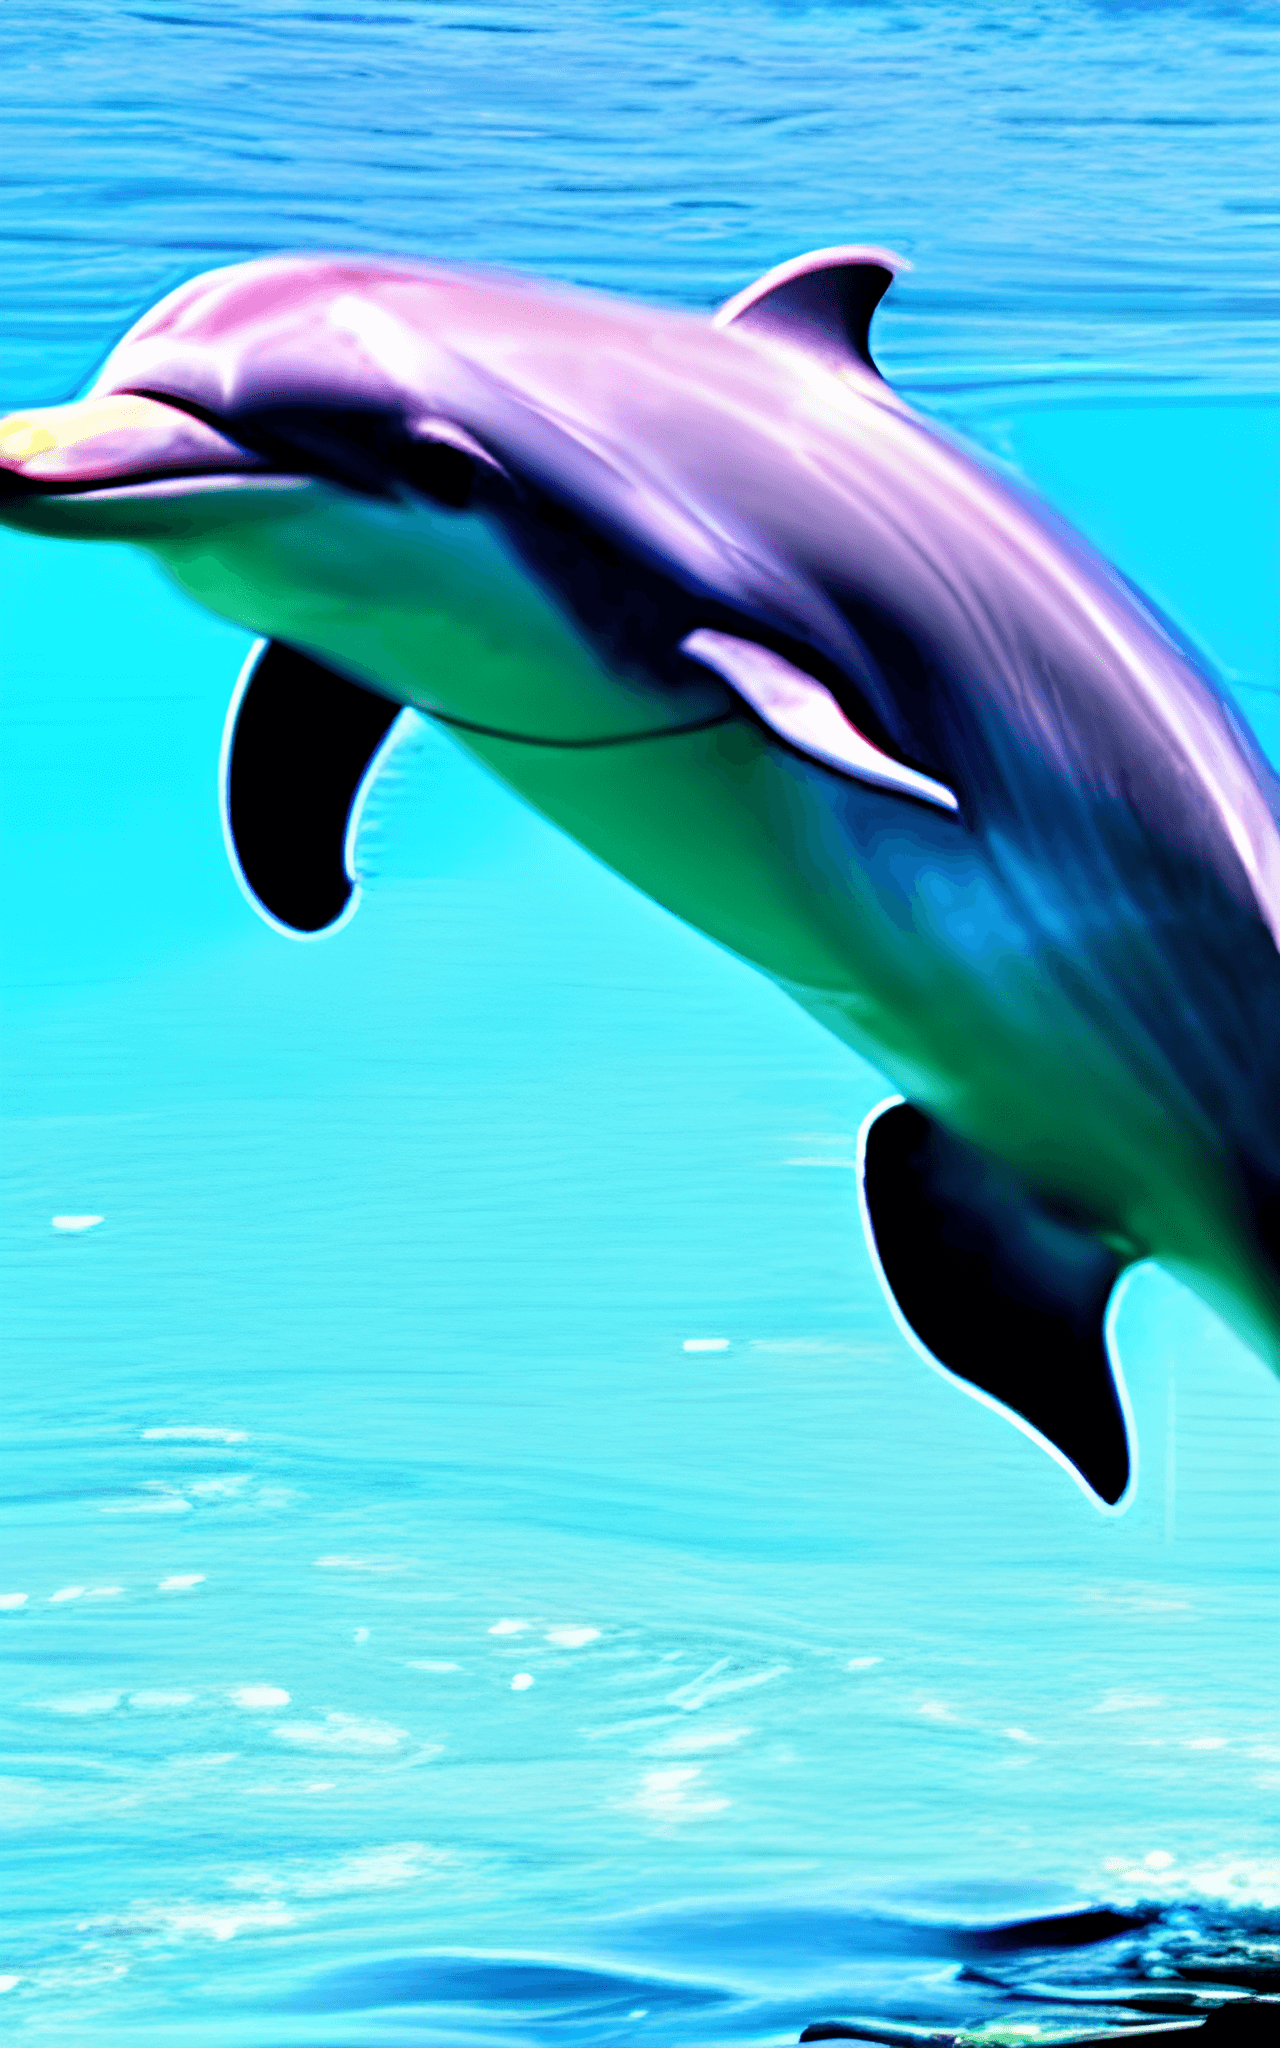 A dolphin jumping out of the water. - Ocean